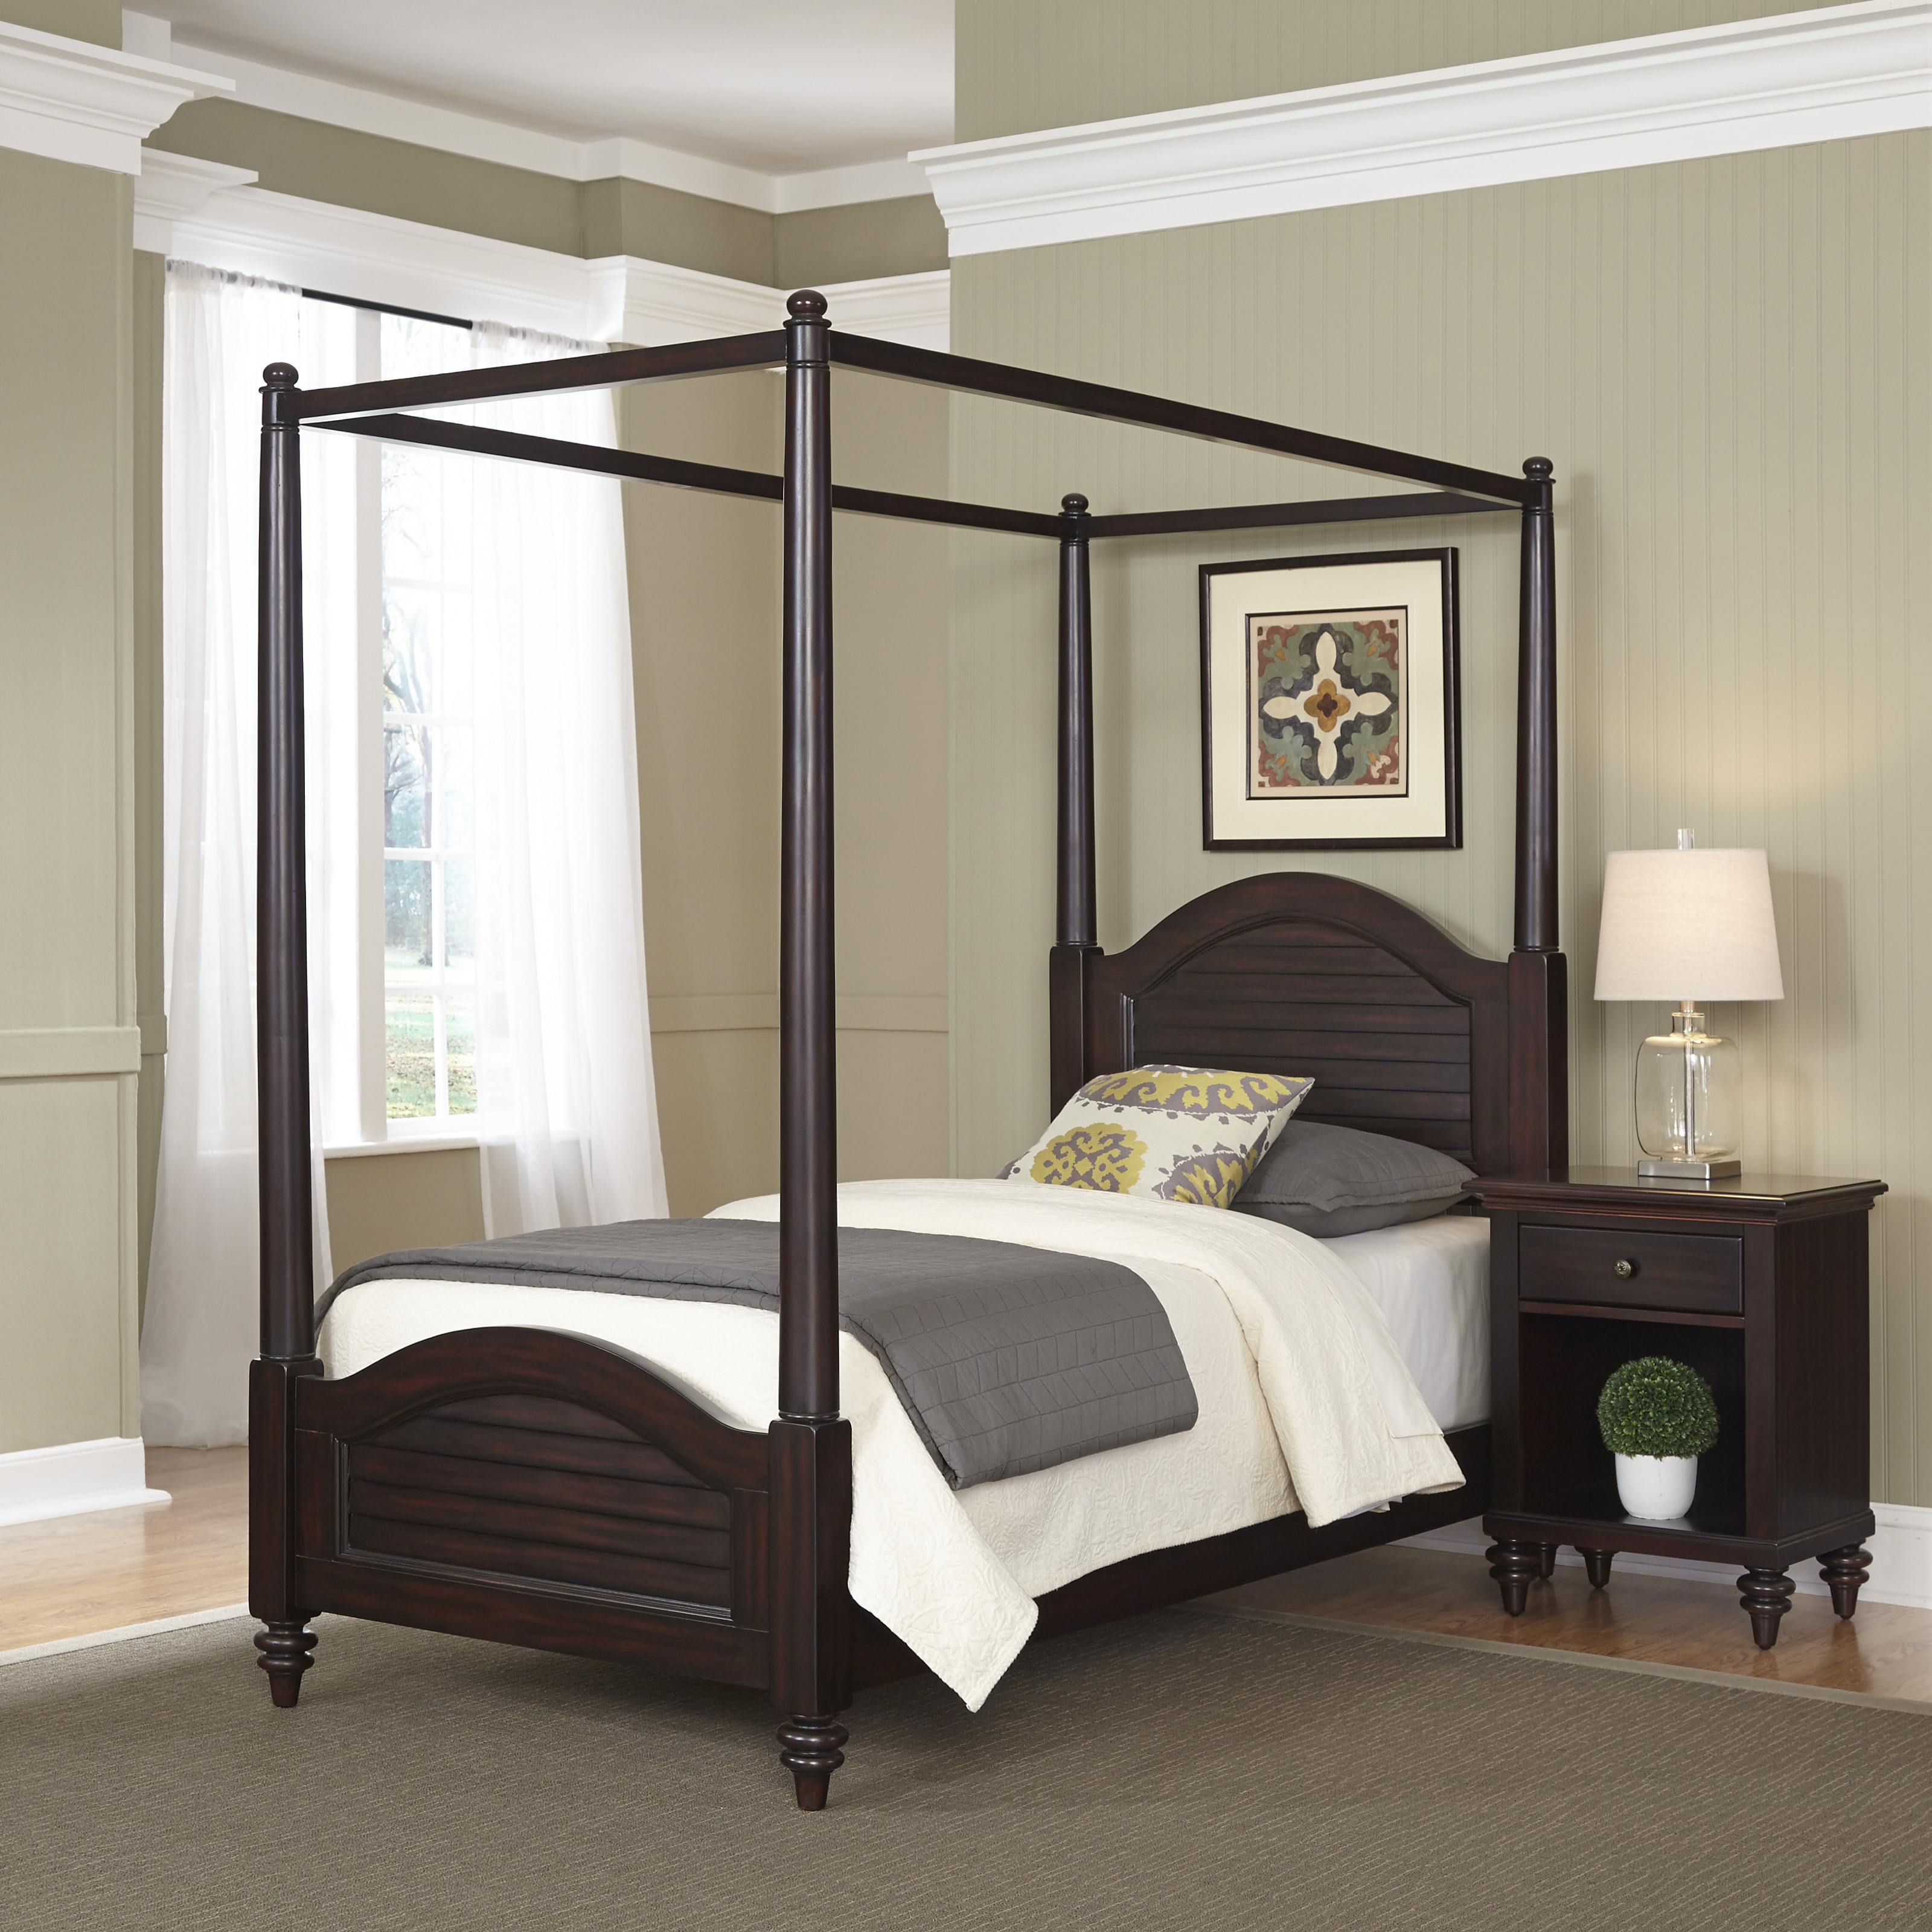 Home Styles Bermuda Espresso Twin Canopy Bed and Night Stand   Home